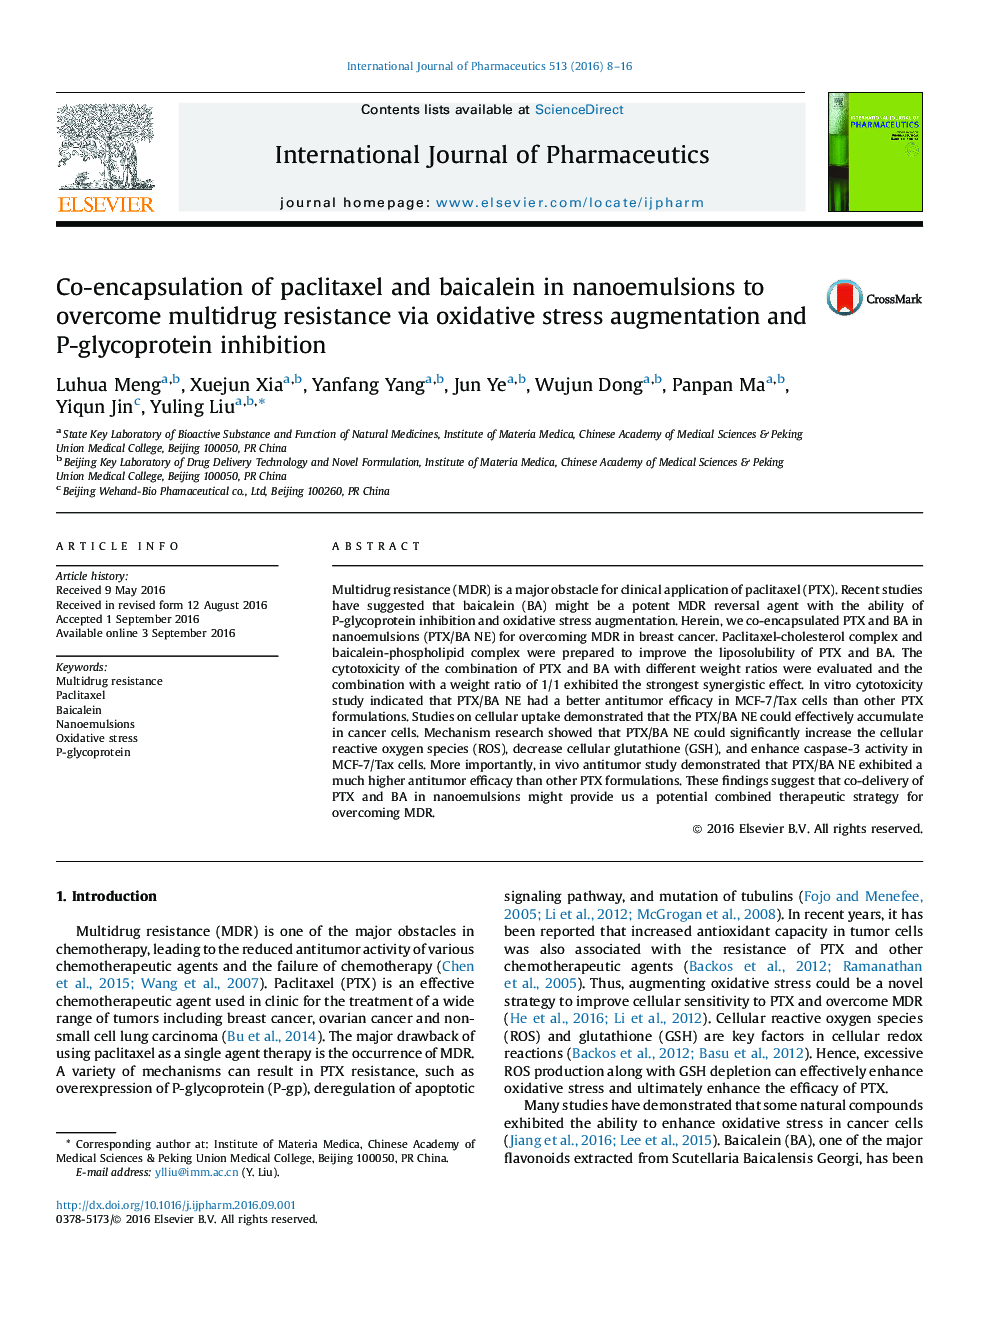 Co-encapsulation of paclitaxel and baicalein in nanoemulsions to overcome multidrug resistance via oxidative stress augmentation and P-glycoprotein inhibition